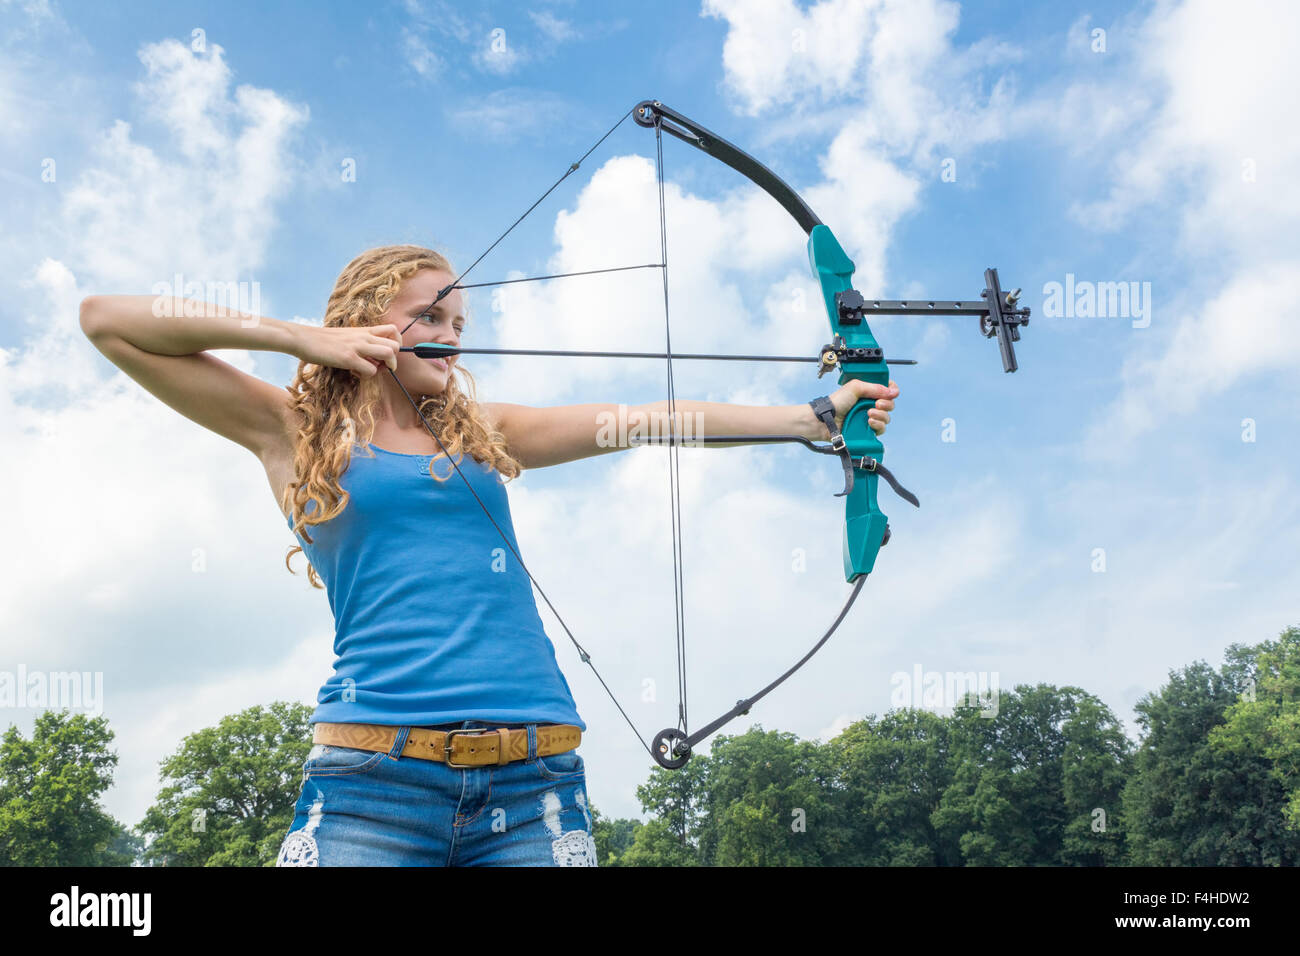 Blonde caucasian girl shooting with arrow and compound bow outdoors on sunny day Stock Photo